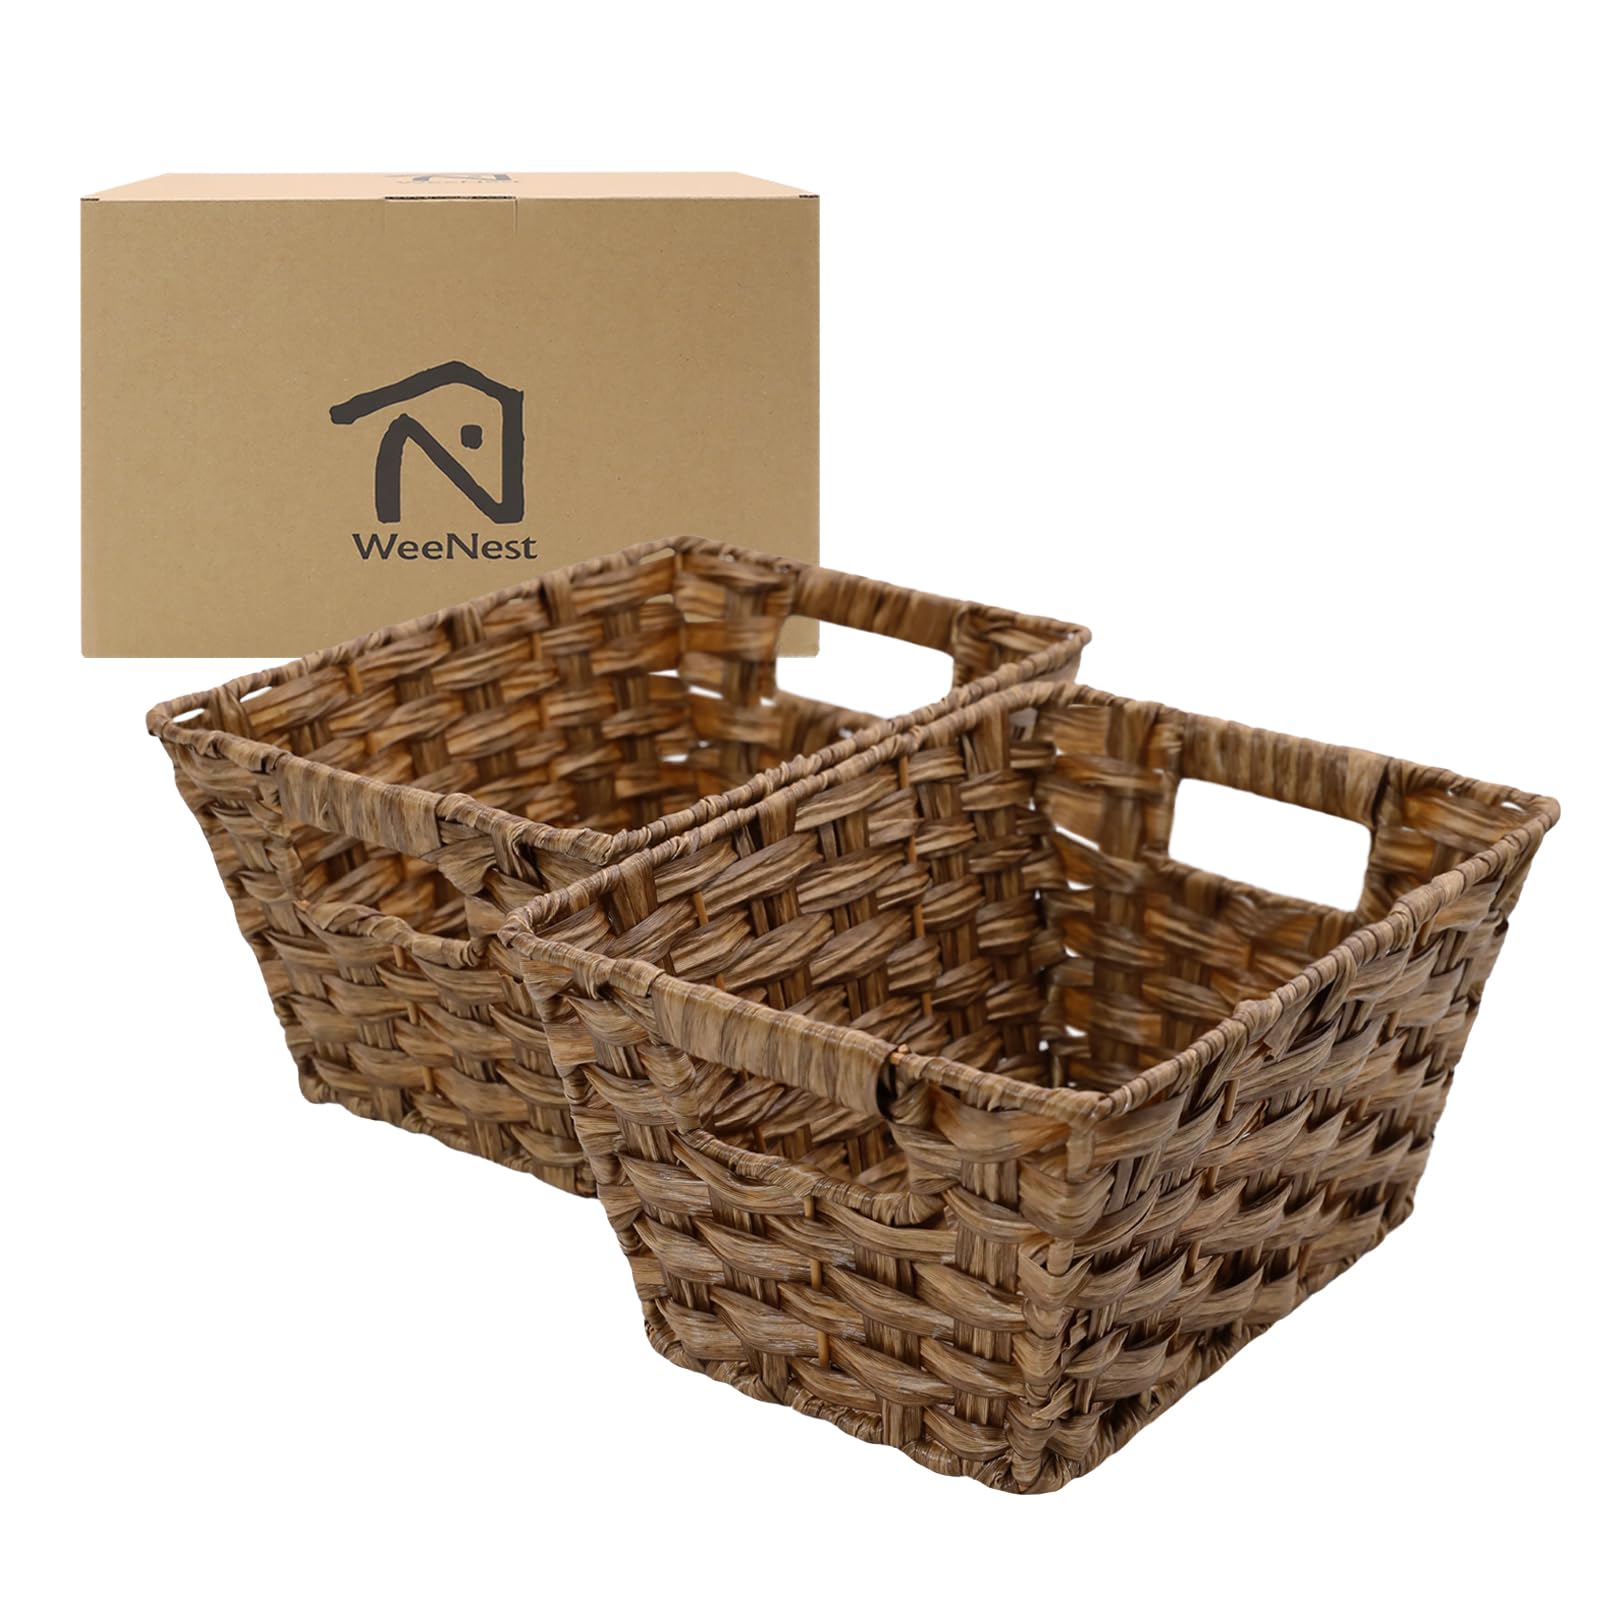 WeeNest Wicker Storage Basket with Handle, Woven Baskets for Organizing and Trays, Holders, Organizers, Storage Baskets for Shelves, Resin Wicker Set of 2, Toffee